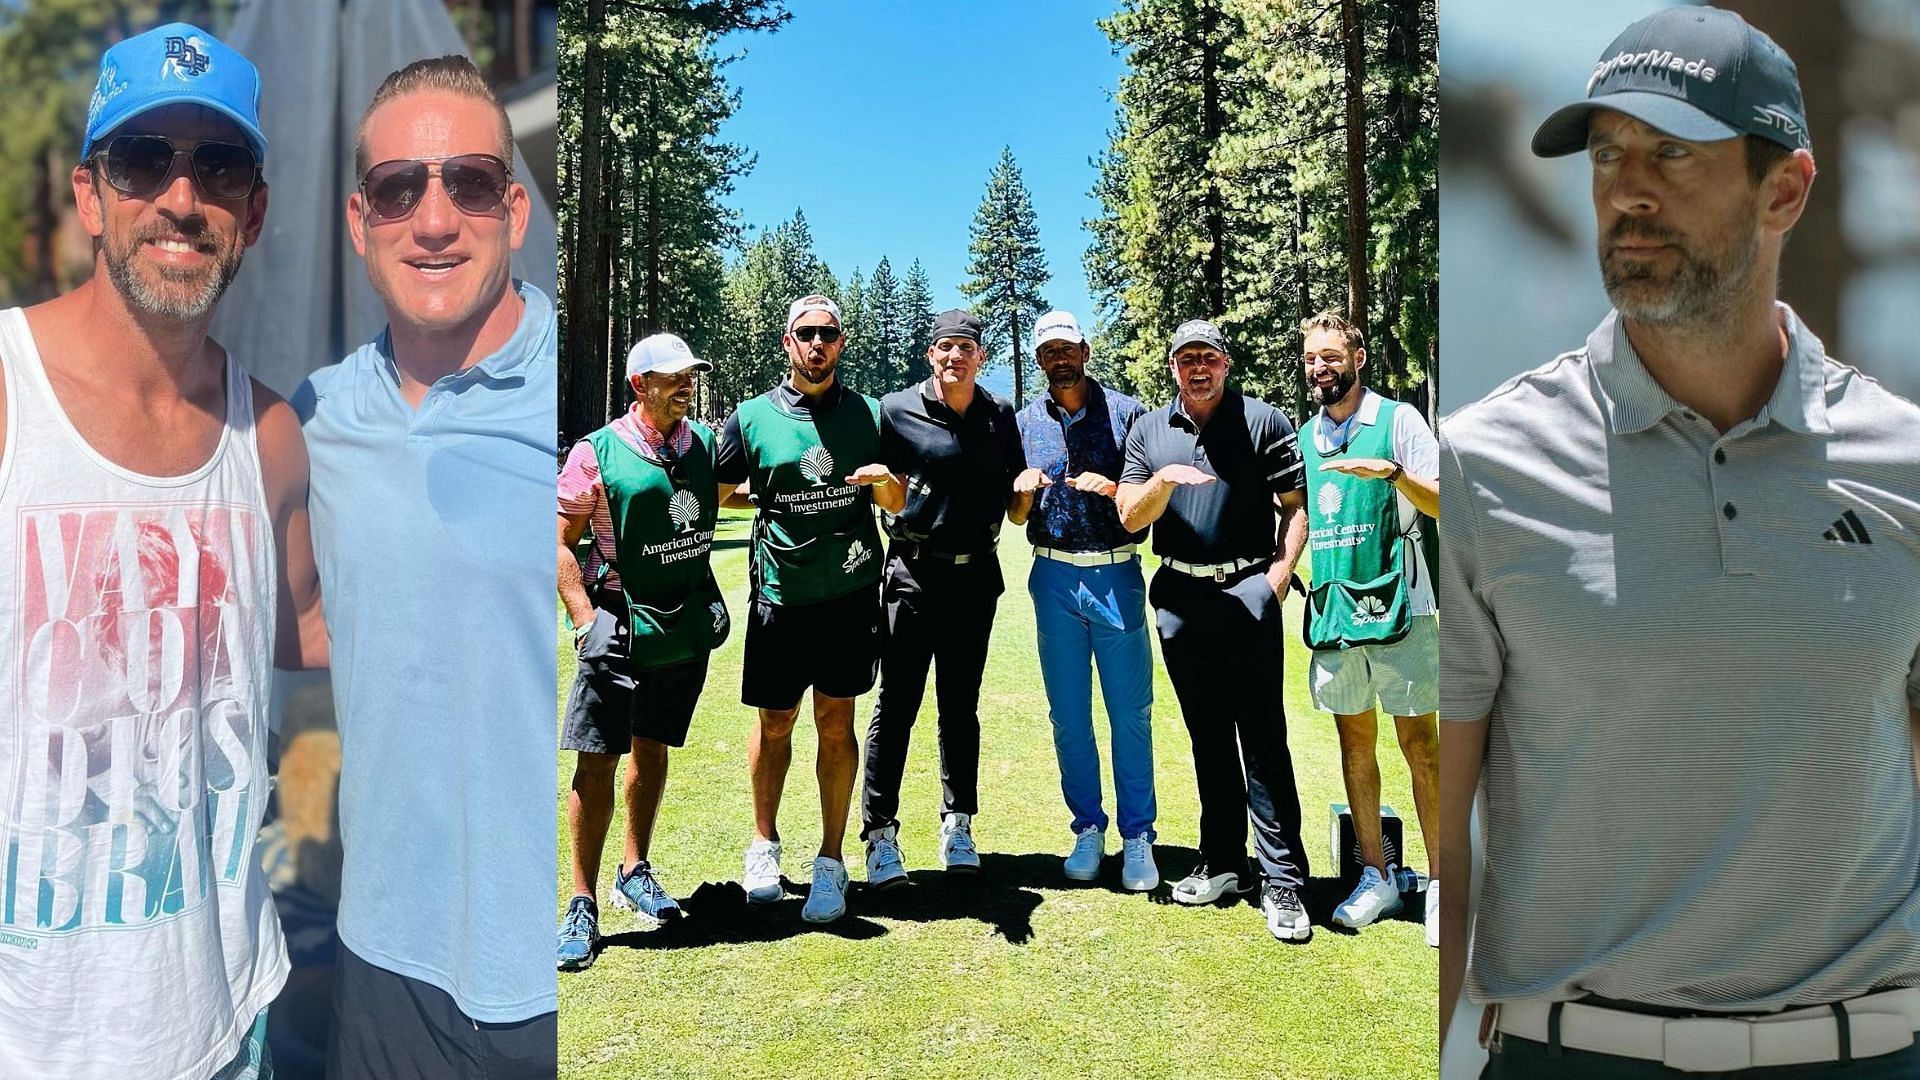 Aaron Rodgers at the 2023 American Century Championship Golf Tournament. (Image credit: Aaron Rodgers on Instagram)